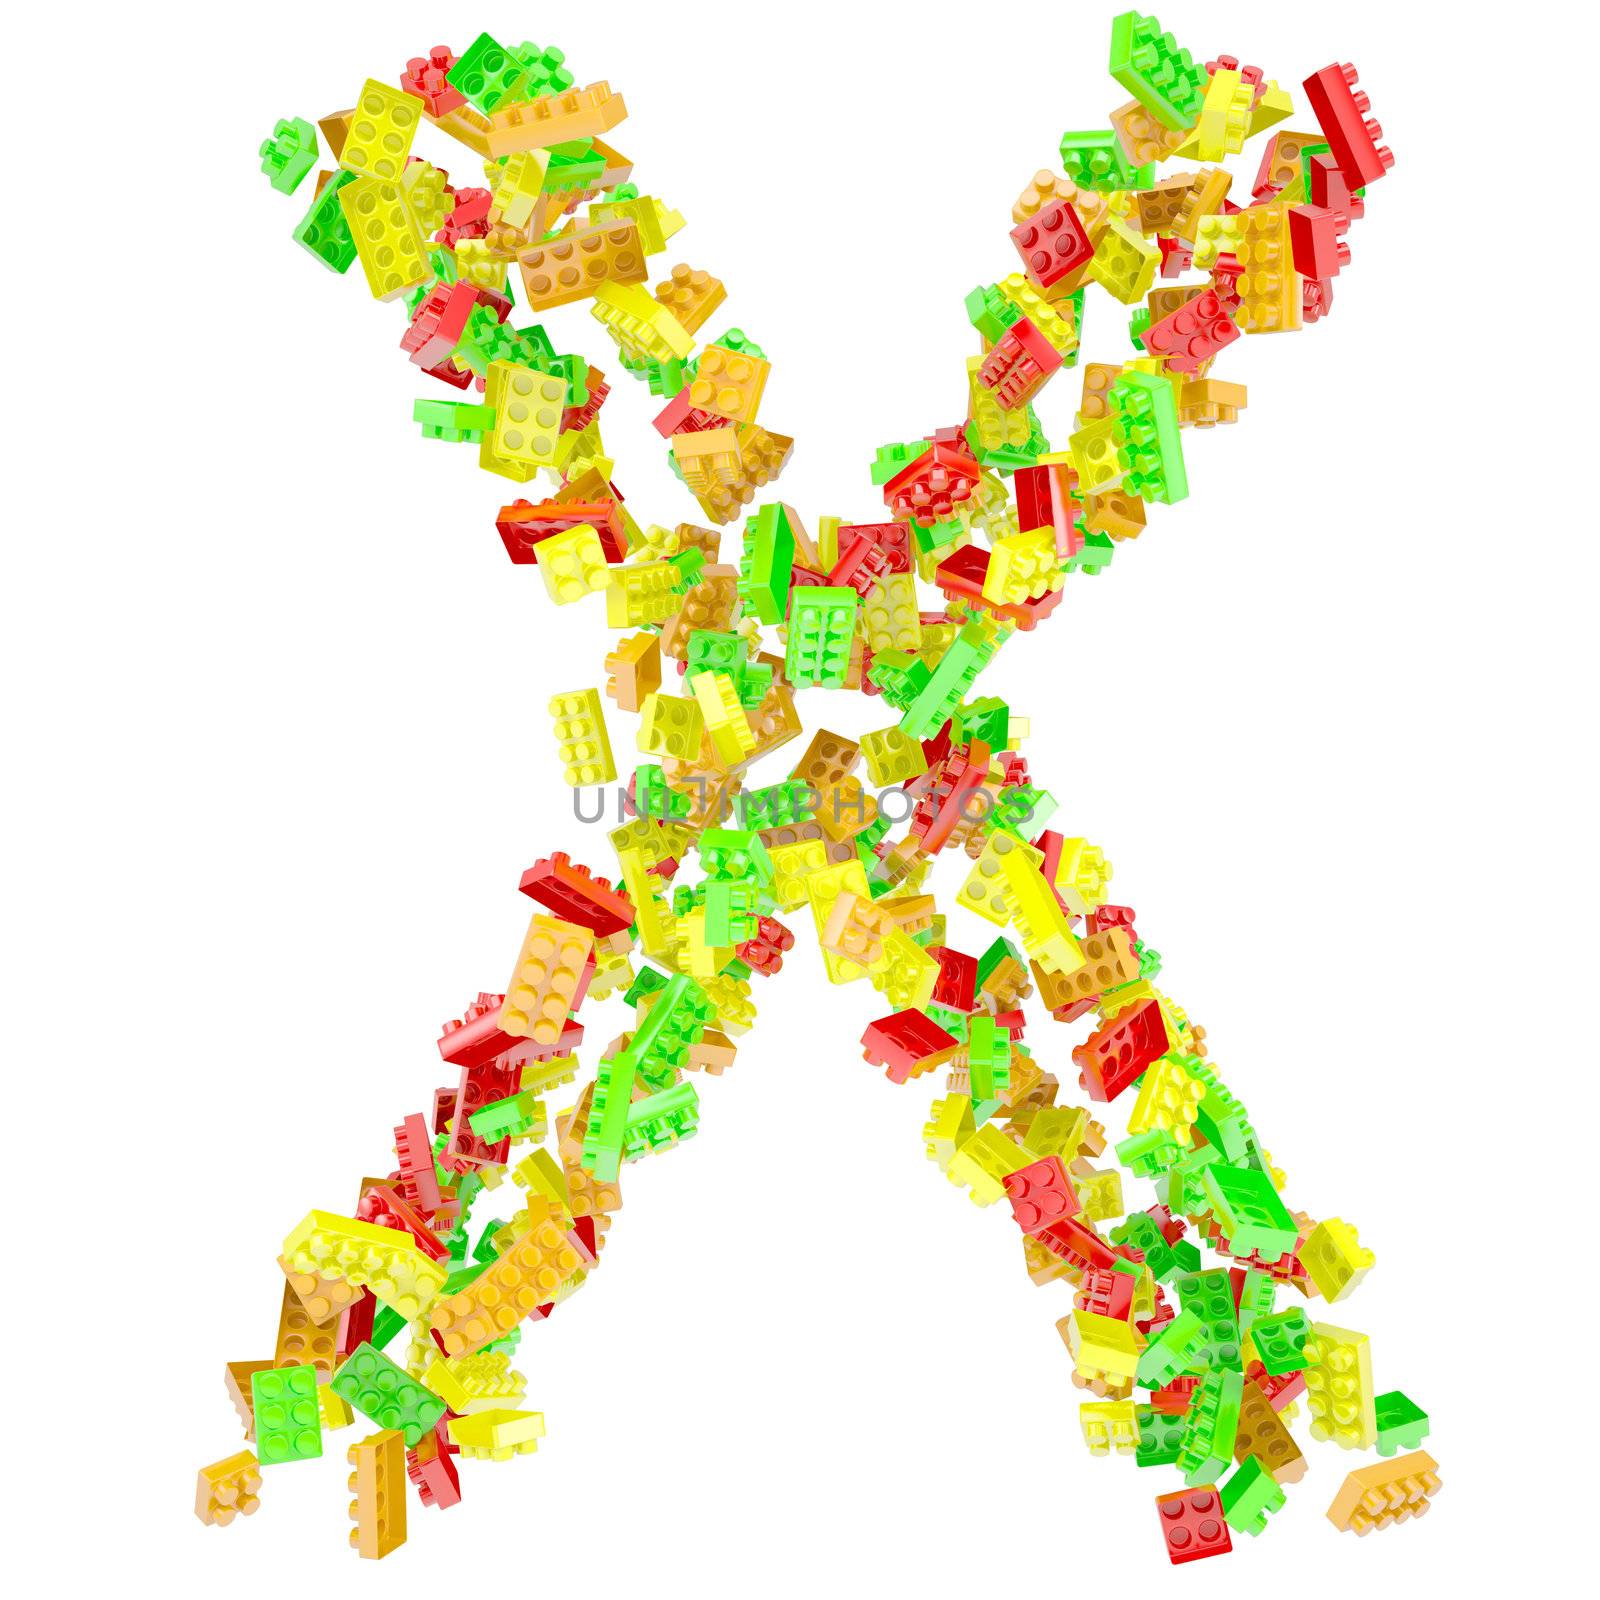 The letter X is made up of children's blocks. Isolated render on a white background